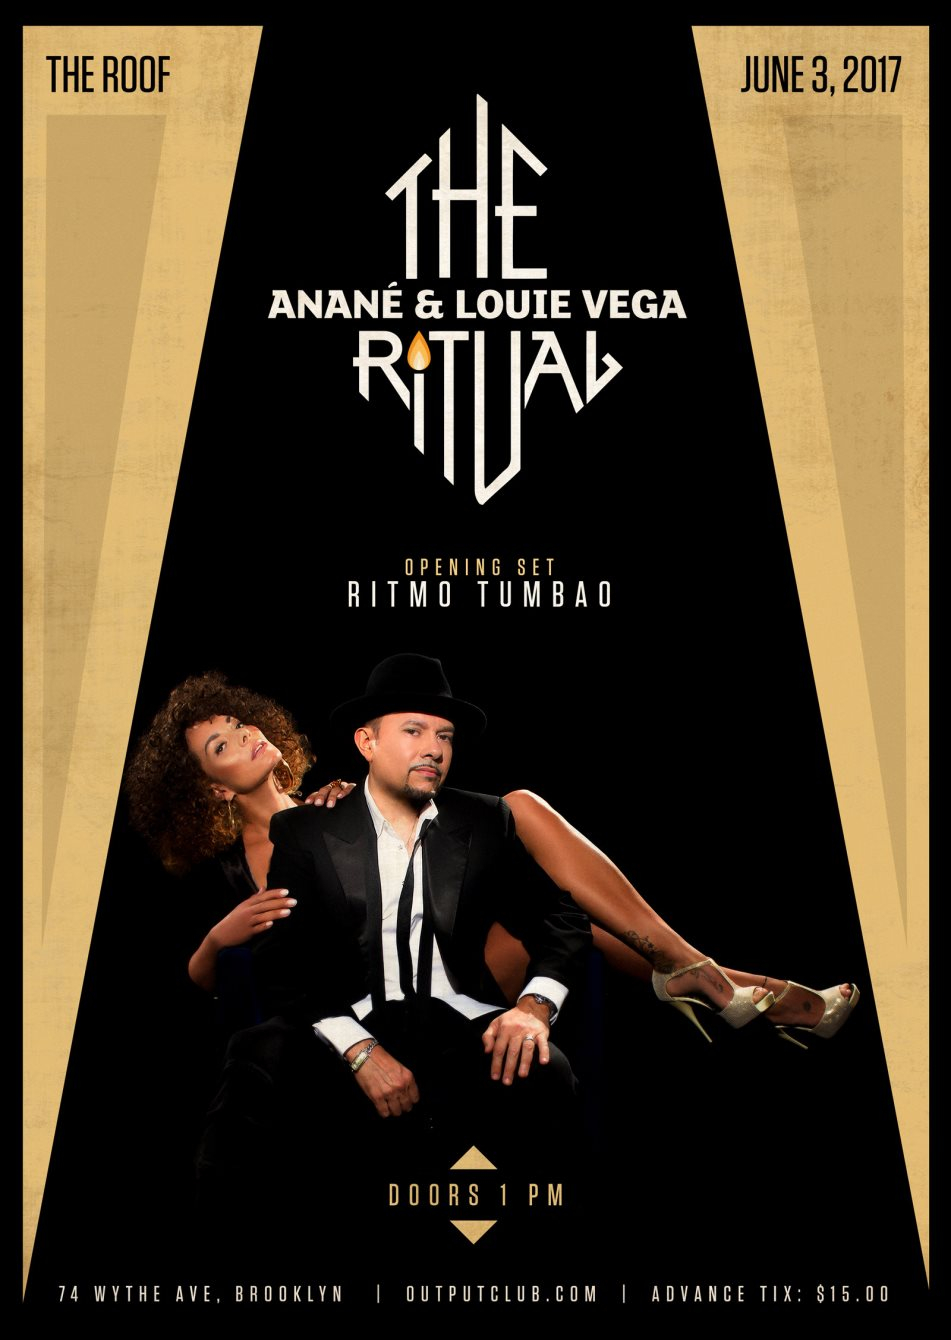 The Ritual with Anane & Louie Vega - Flyer back